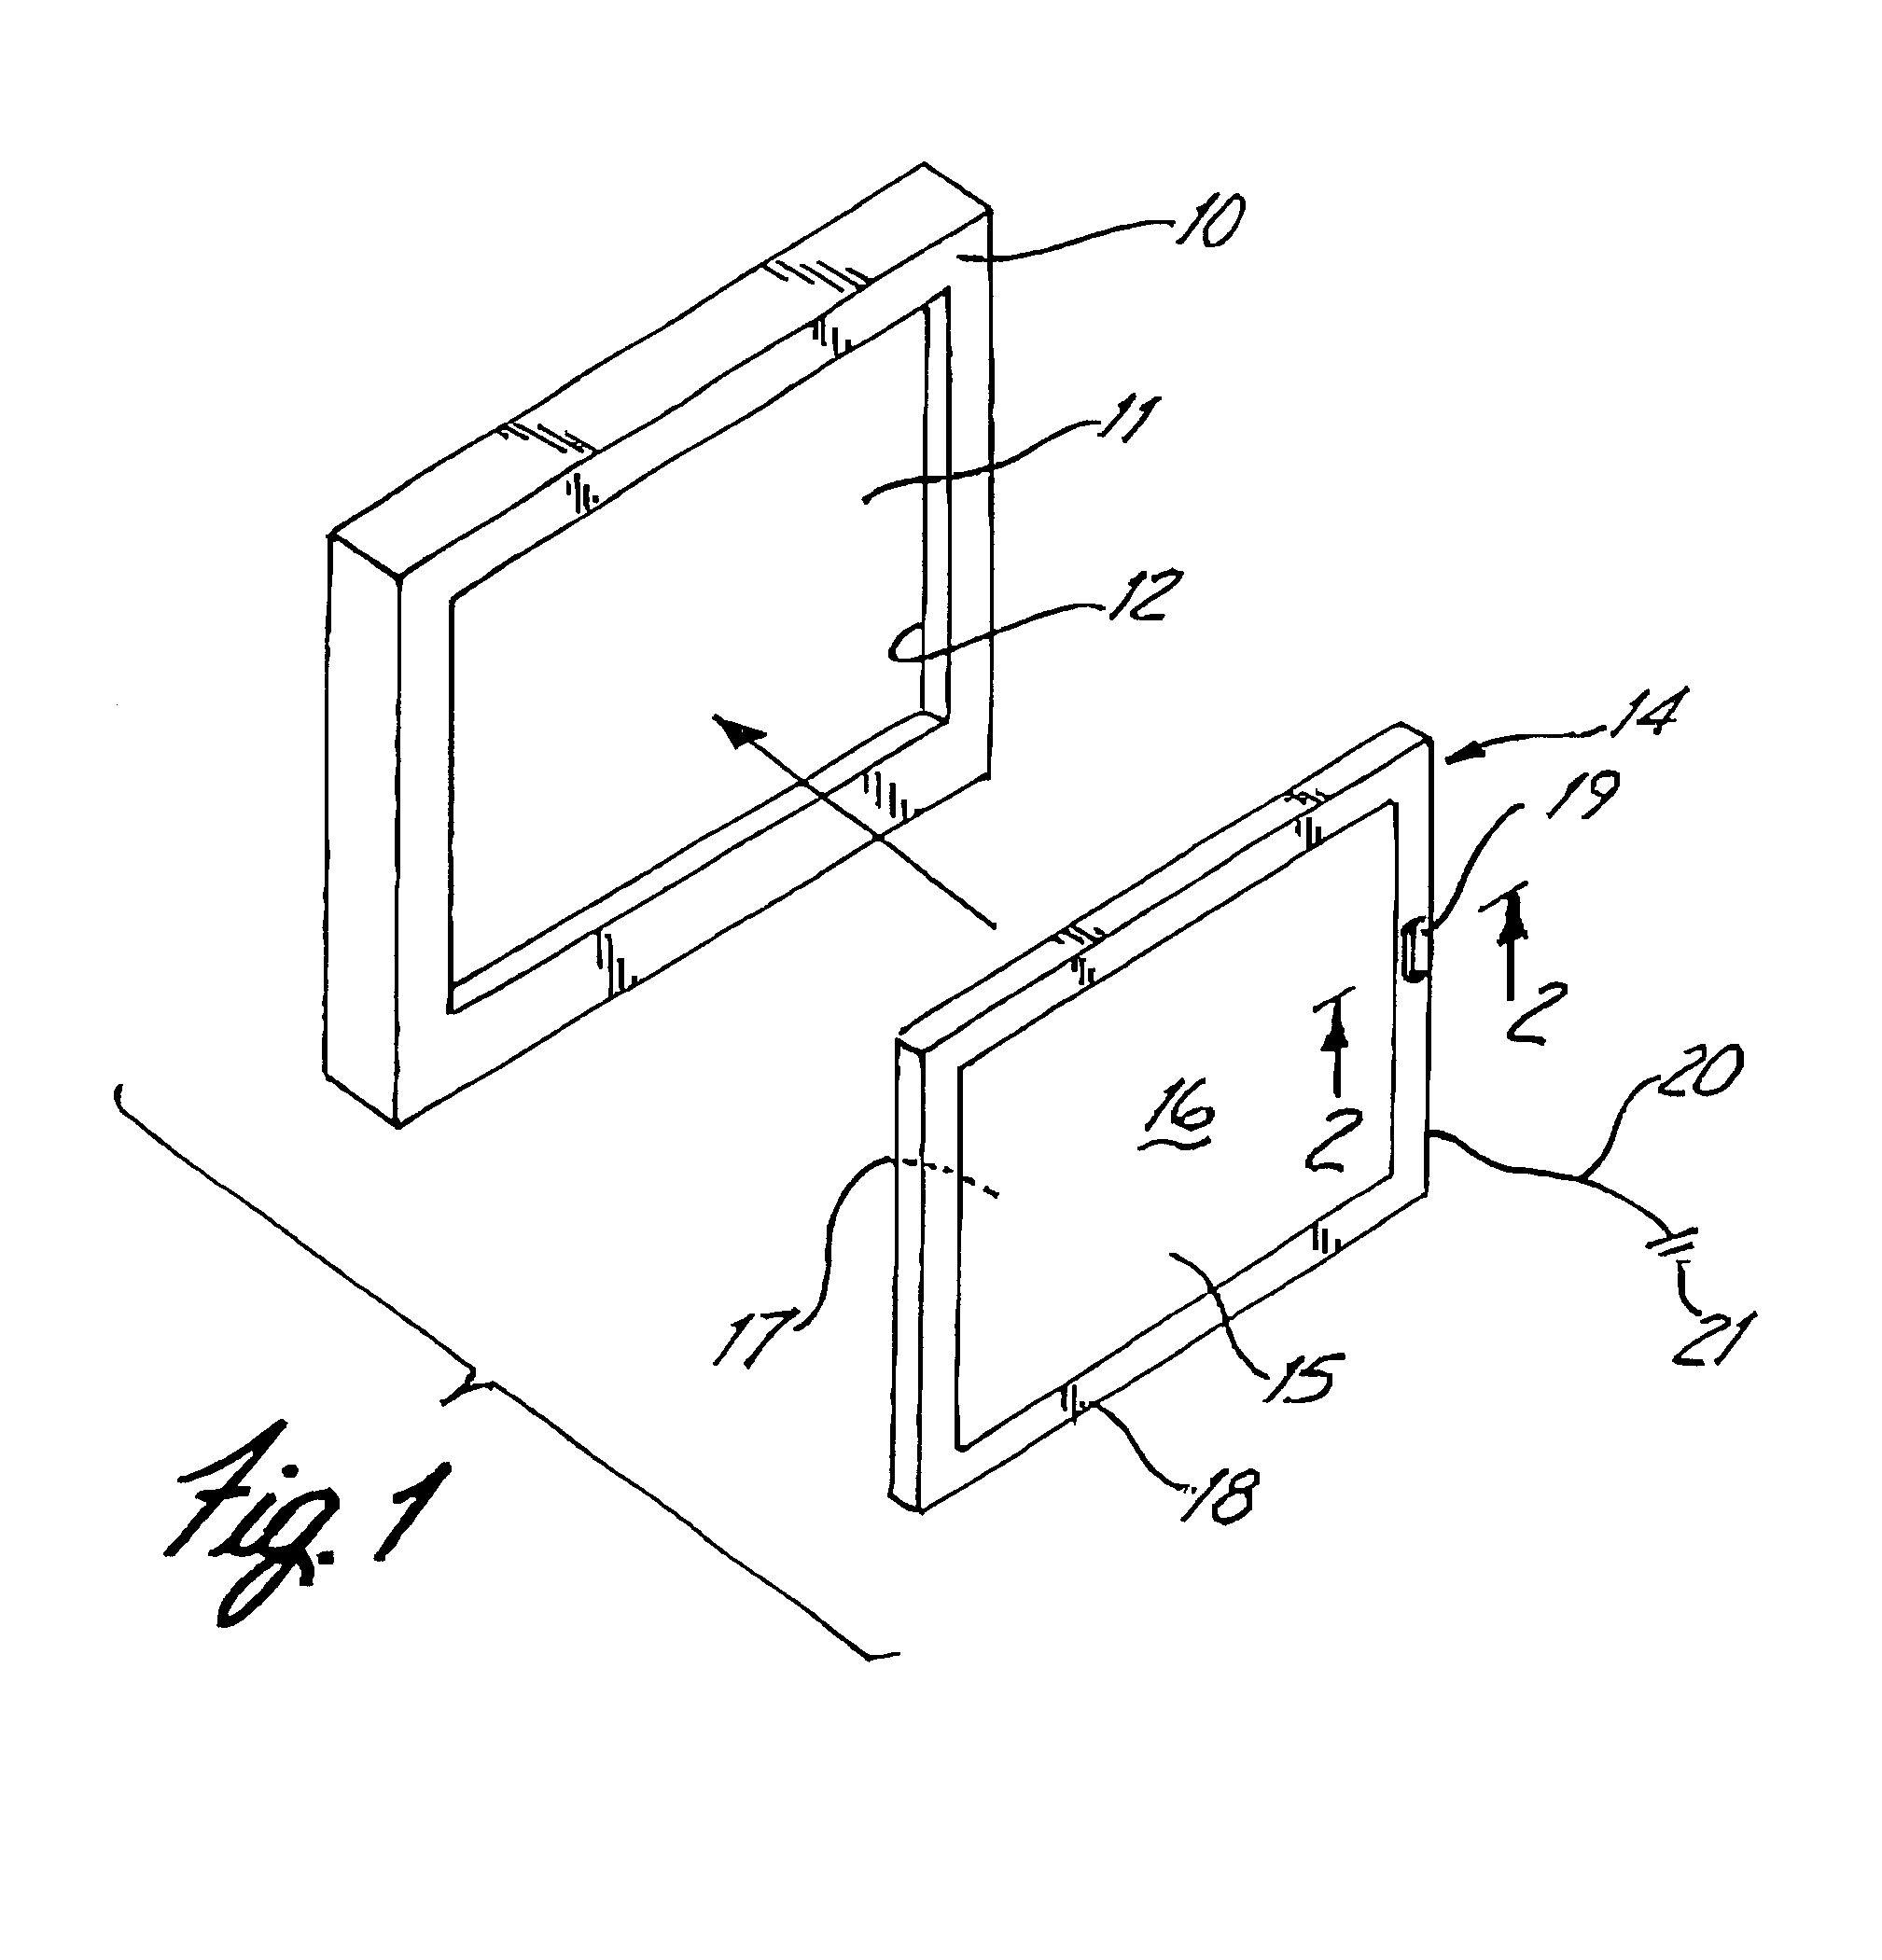 Display panel filter and method of making the same